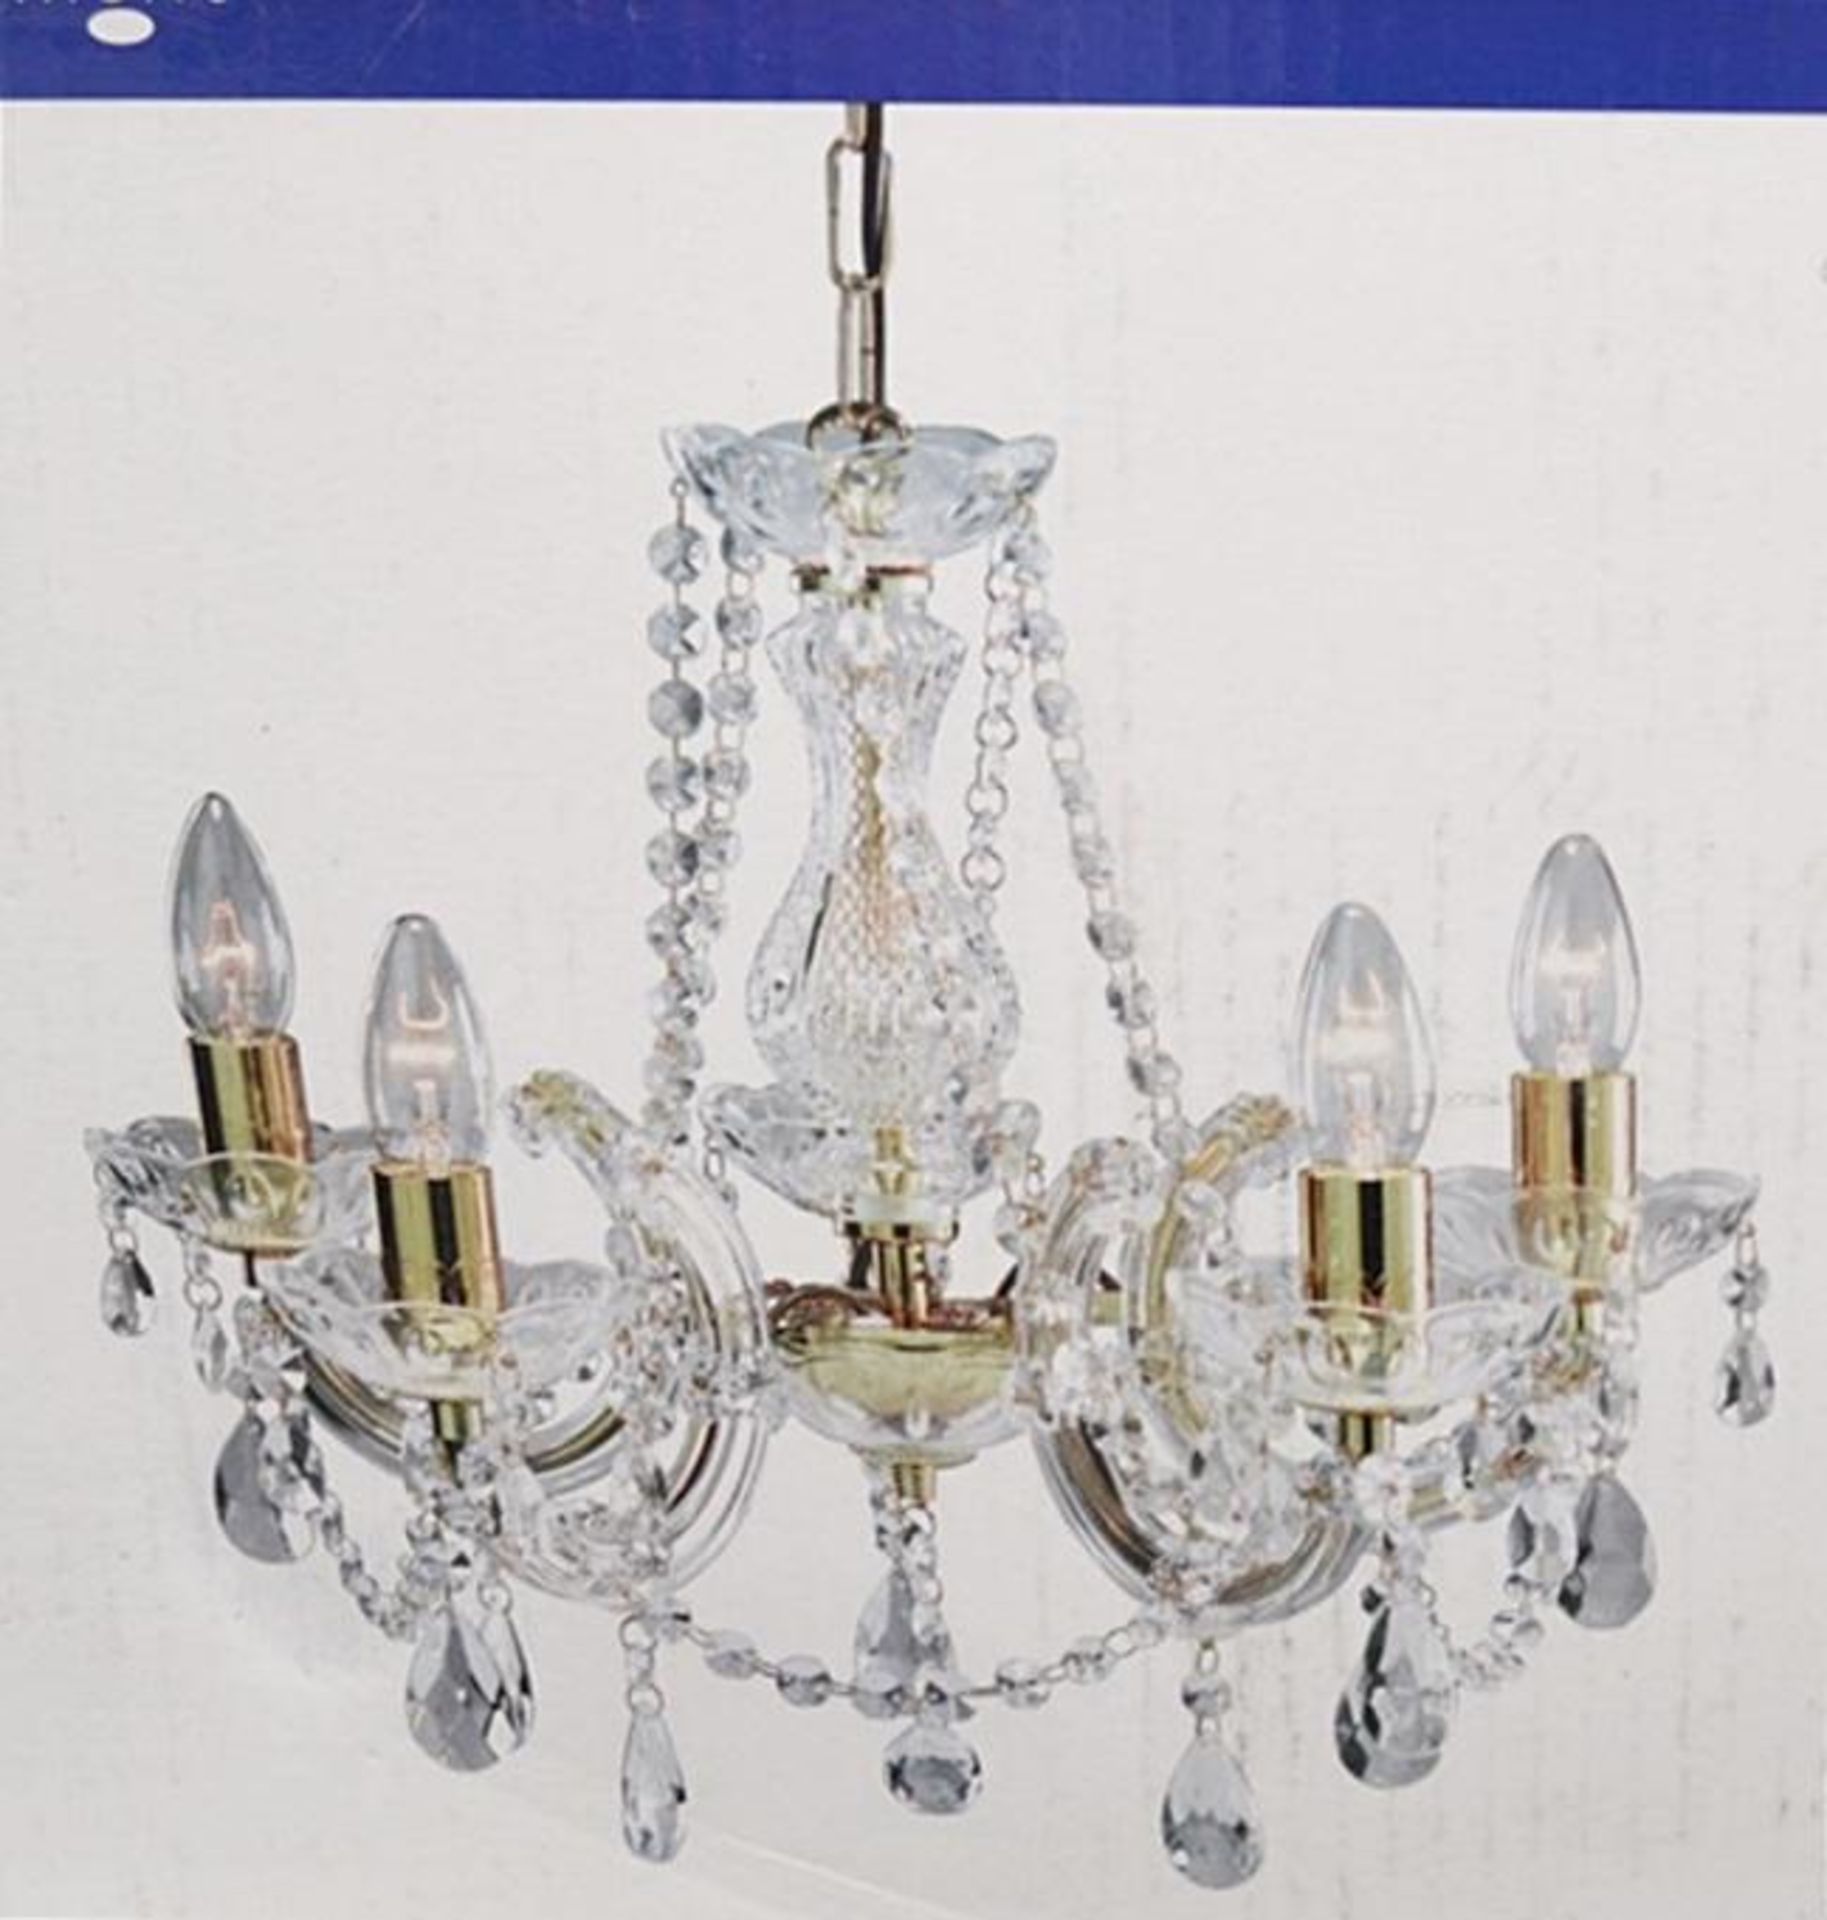 1 x Marie Therese 5 Light Chandelier Polished Brass - New Boxed Stock - CL323 - Ref: Rack A Top - 69